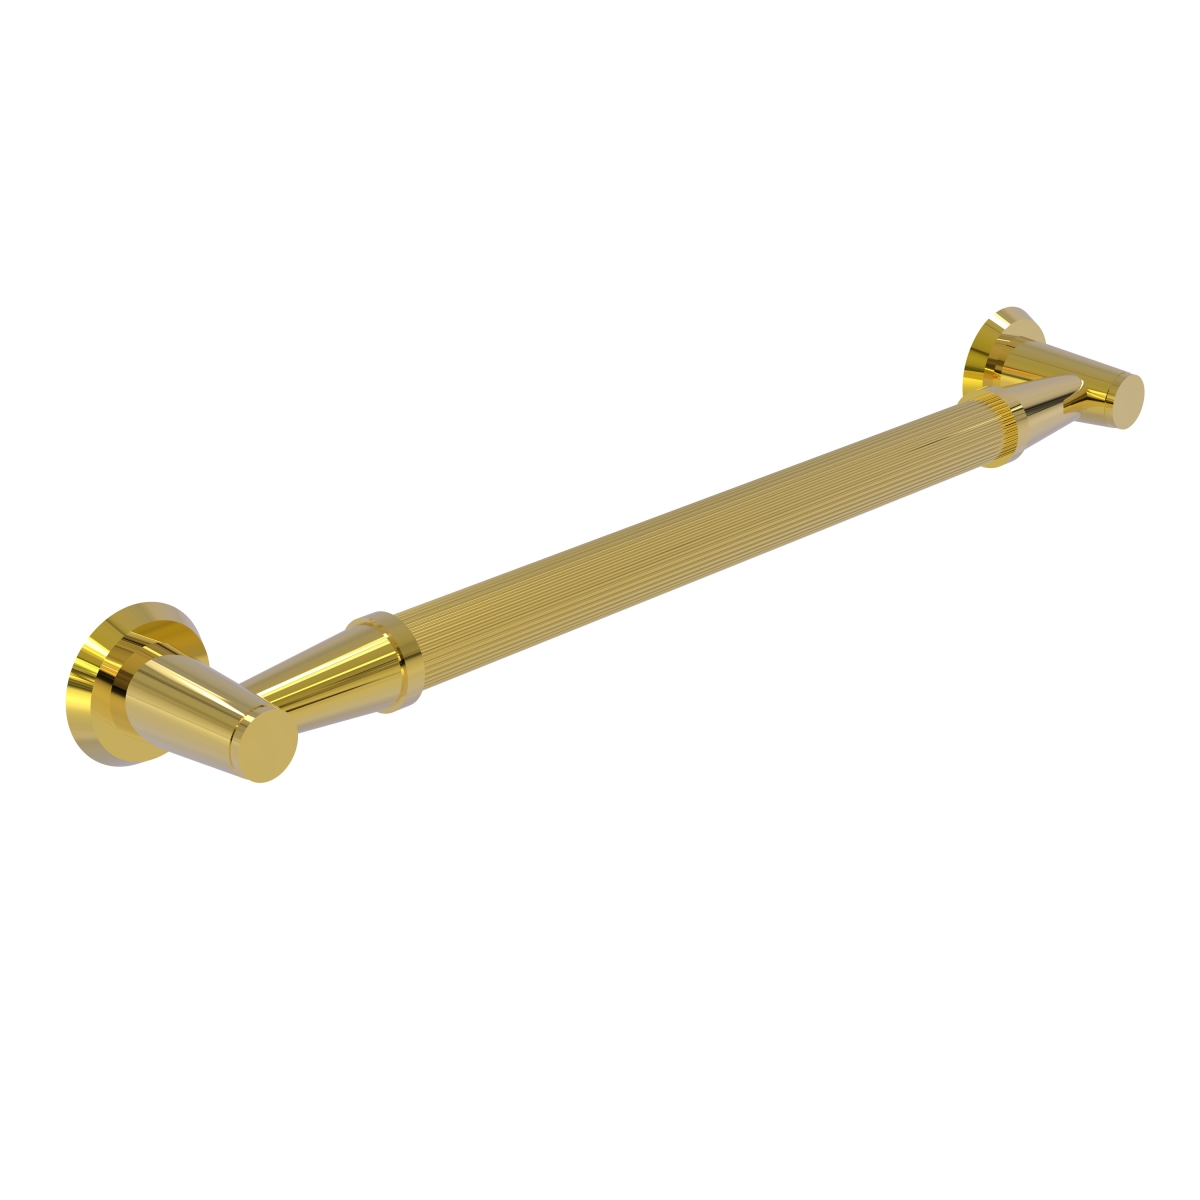 Picture of Allied Brass MD-GRR-36-PB 36 in. Reeded Grab Bar, Polished Brass - 3.5 x 38 x 36 in.